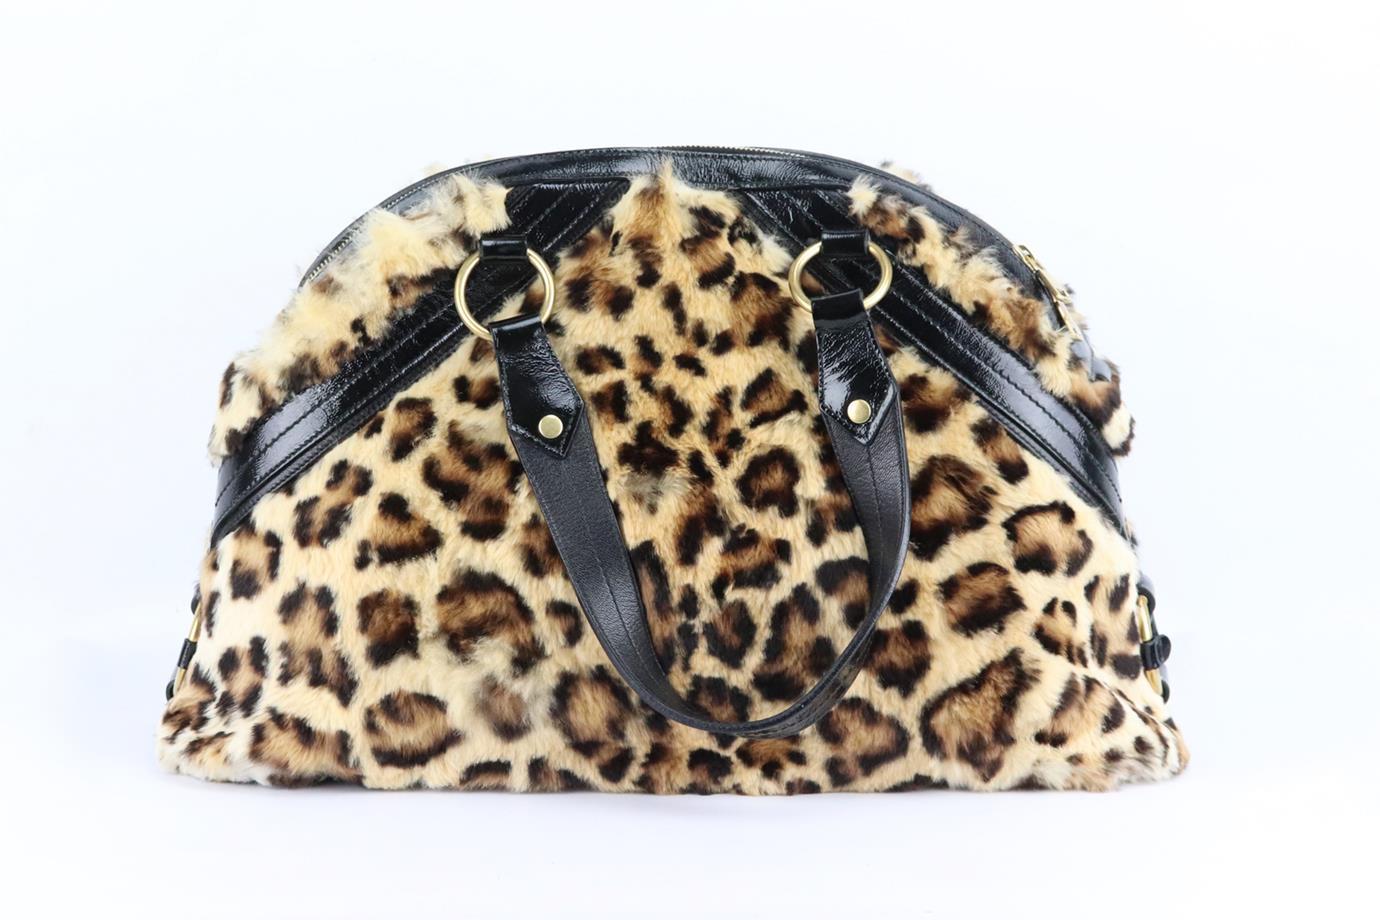 Yves Saint Laurent Muse large leopard print fur shoulder bag. Made from beige, brown and black leopard-print rabbit fur with black patent-leather trim and gold-tone hardware, it has a large interior compartment with zipped pocket. Beige, black and